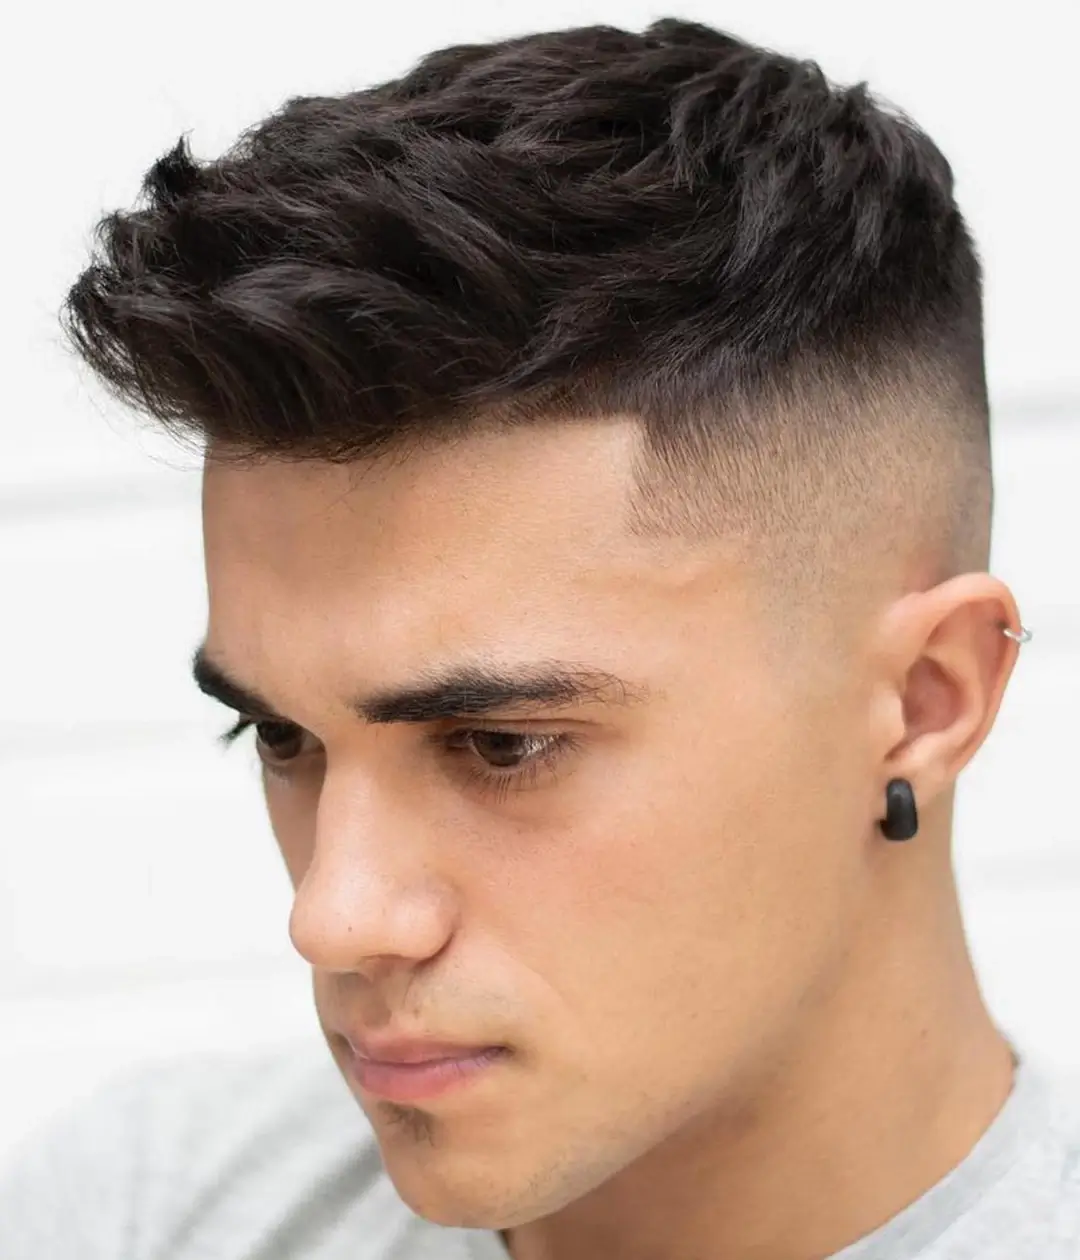 Men's Fade Haircut with Textured Top from Fifth Ave Barber Shop in Midtown NYC